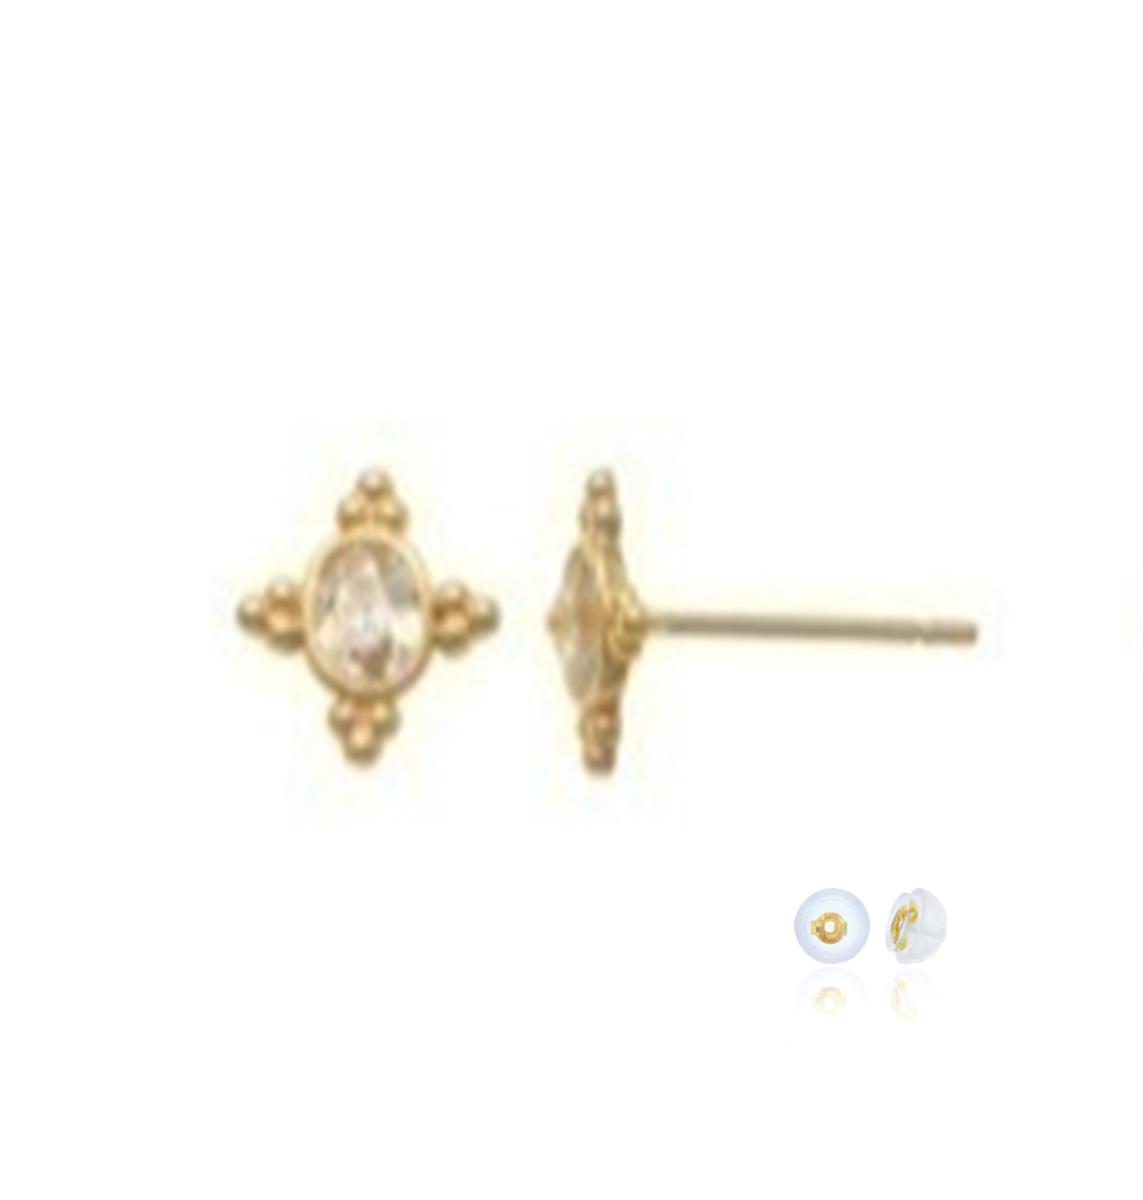 10K Yellow Gold Vintage Bezel 8.5X7 White CZ Stud Earring with Silicone Back